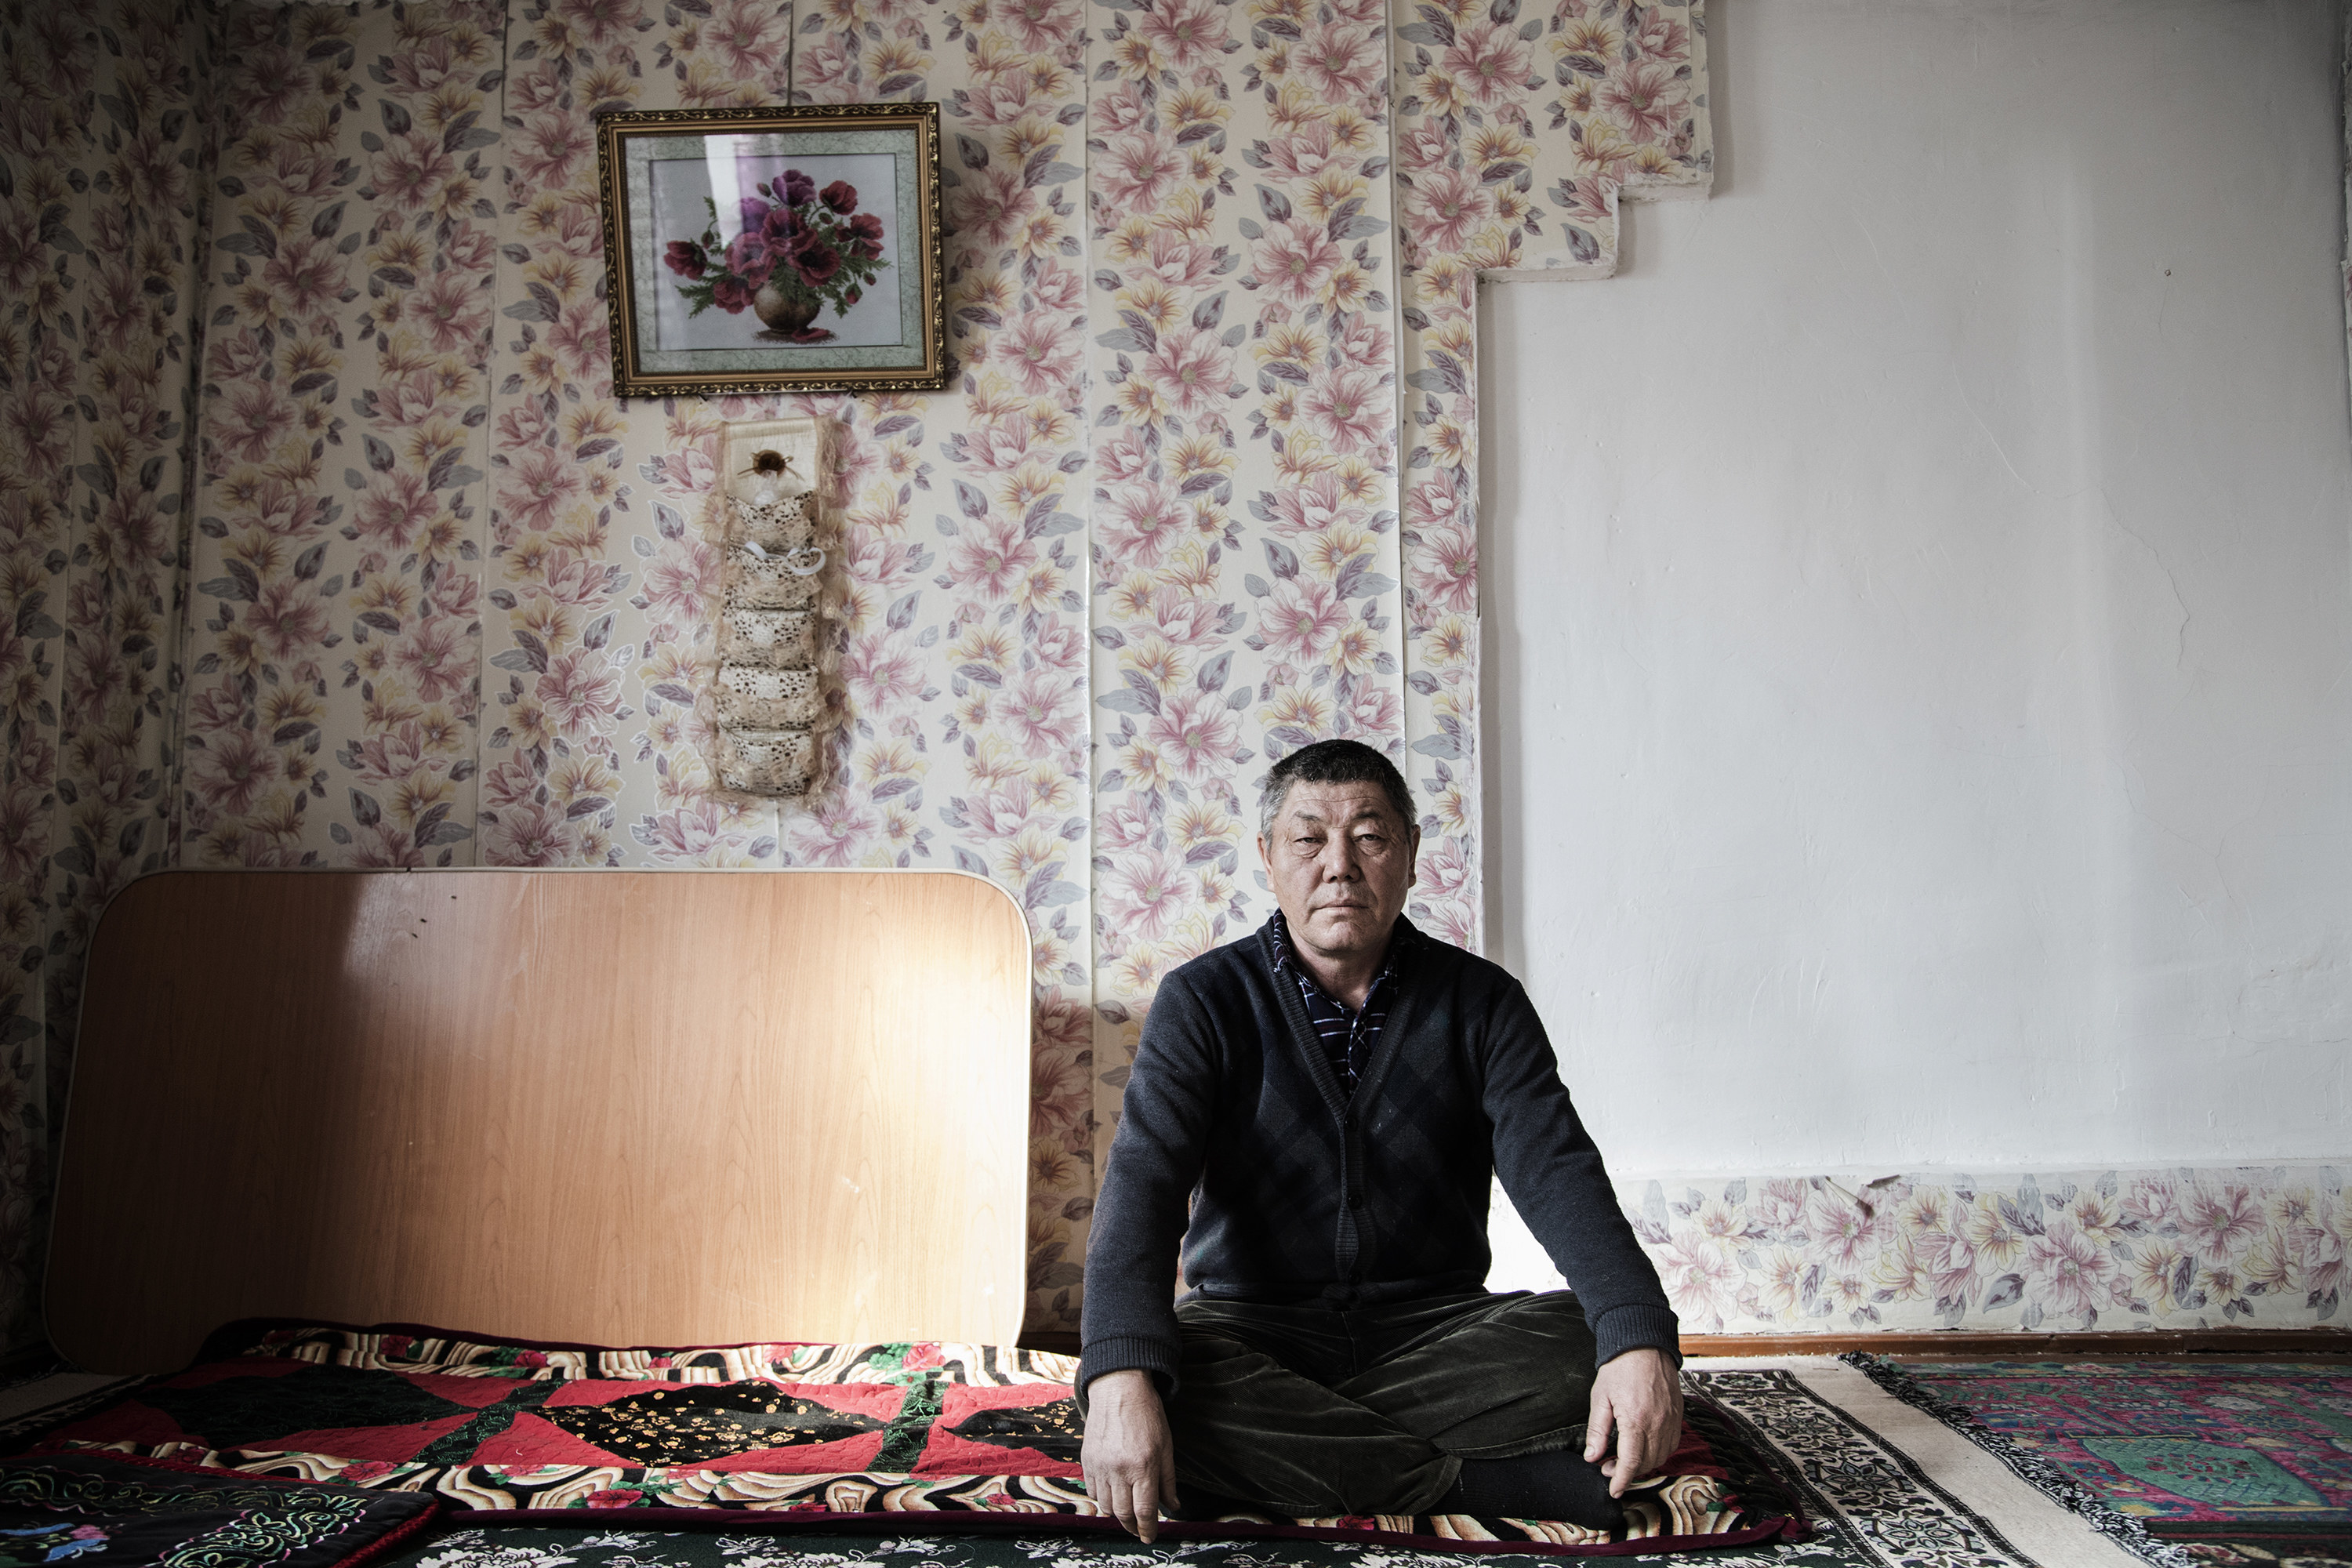 A Uighur man sitting on the floor with his hands on his knees